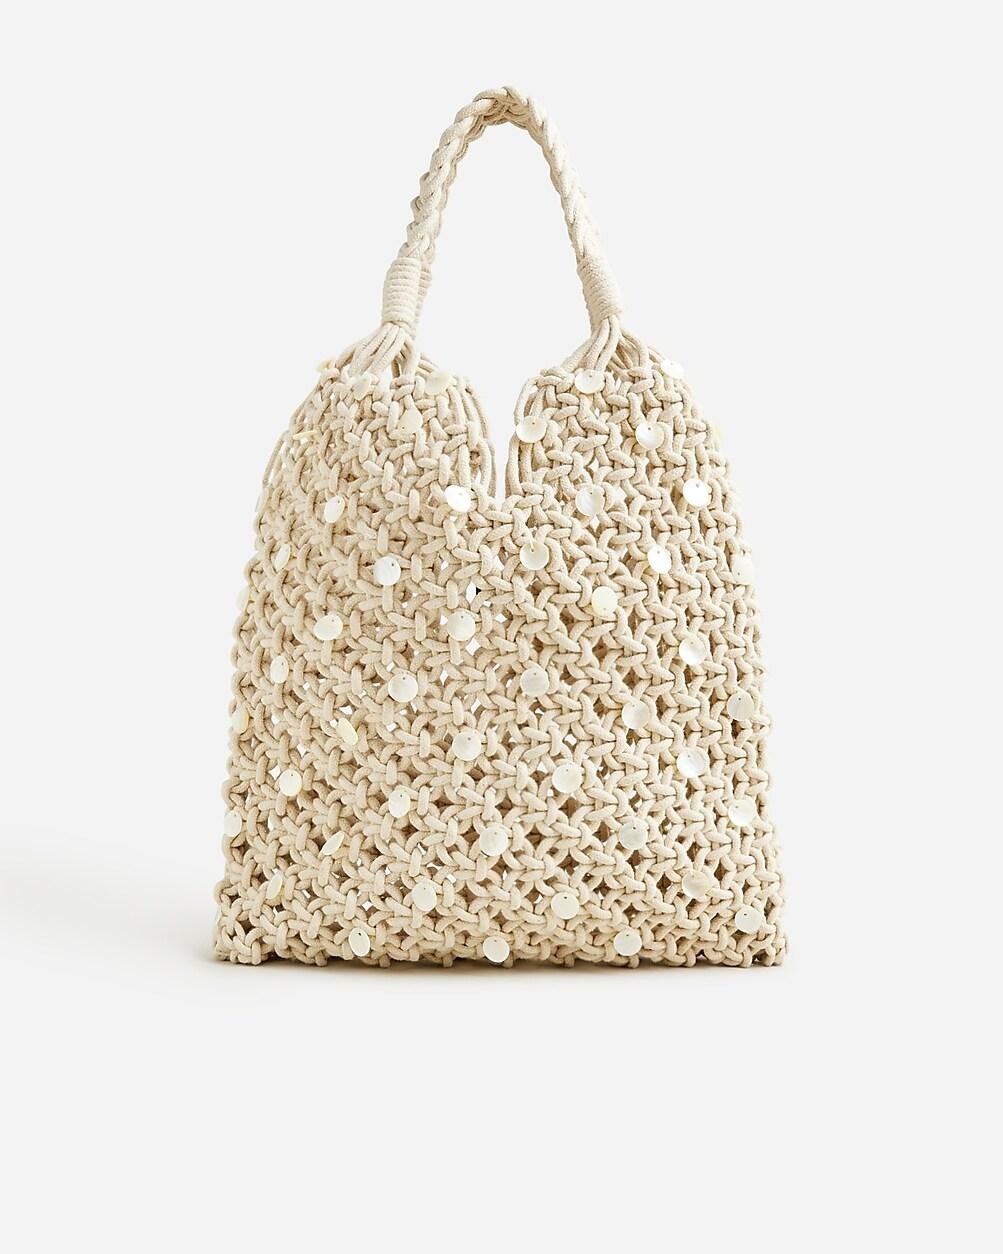 Cadiz hand-knotted rope tote with beads by J.CREW